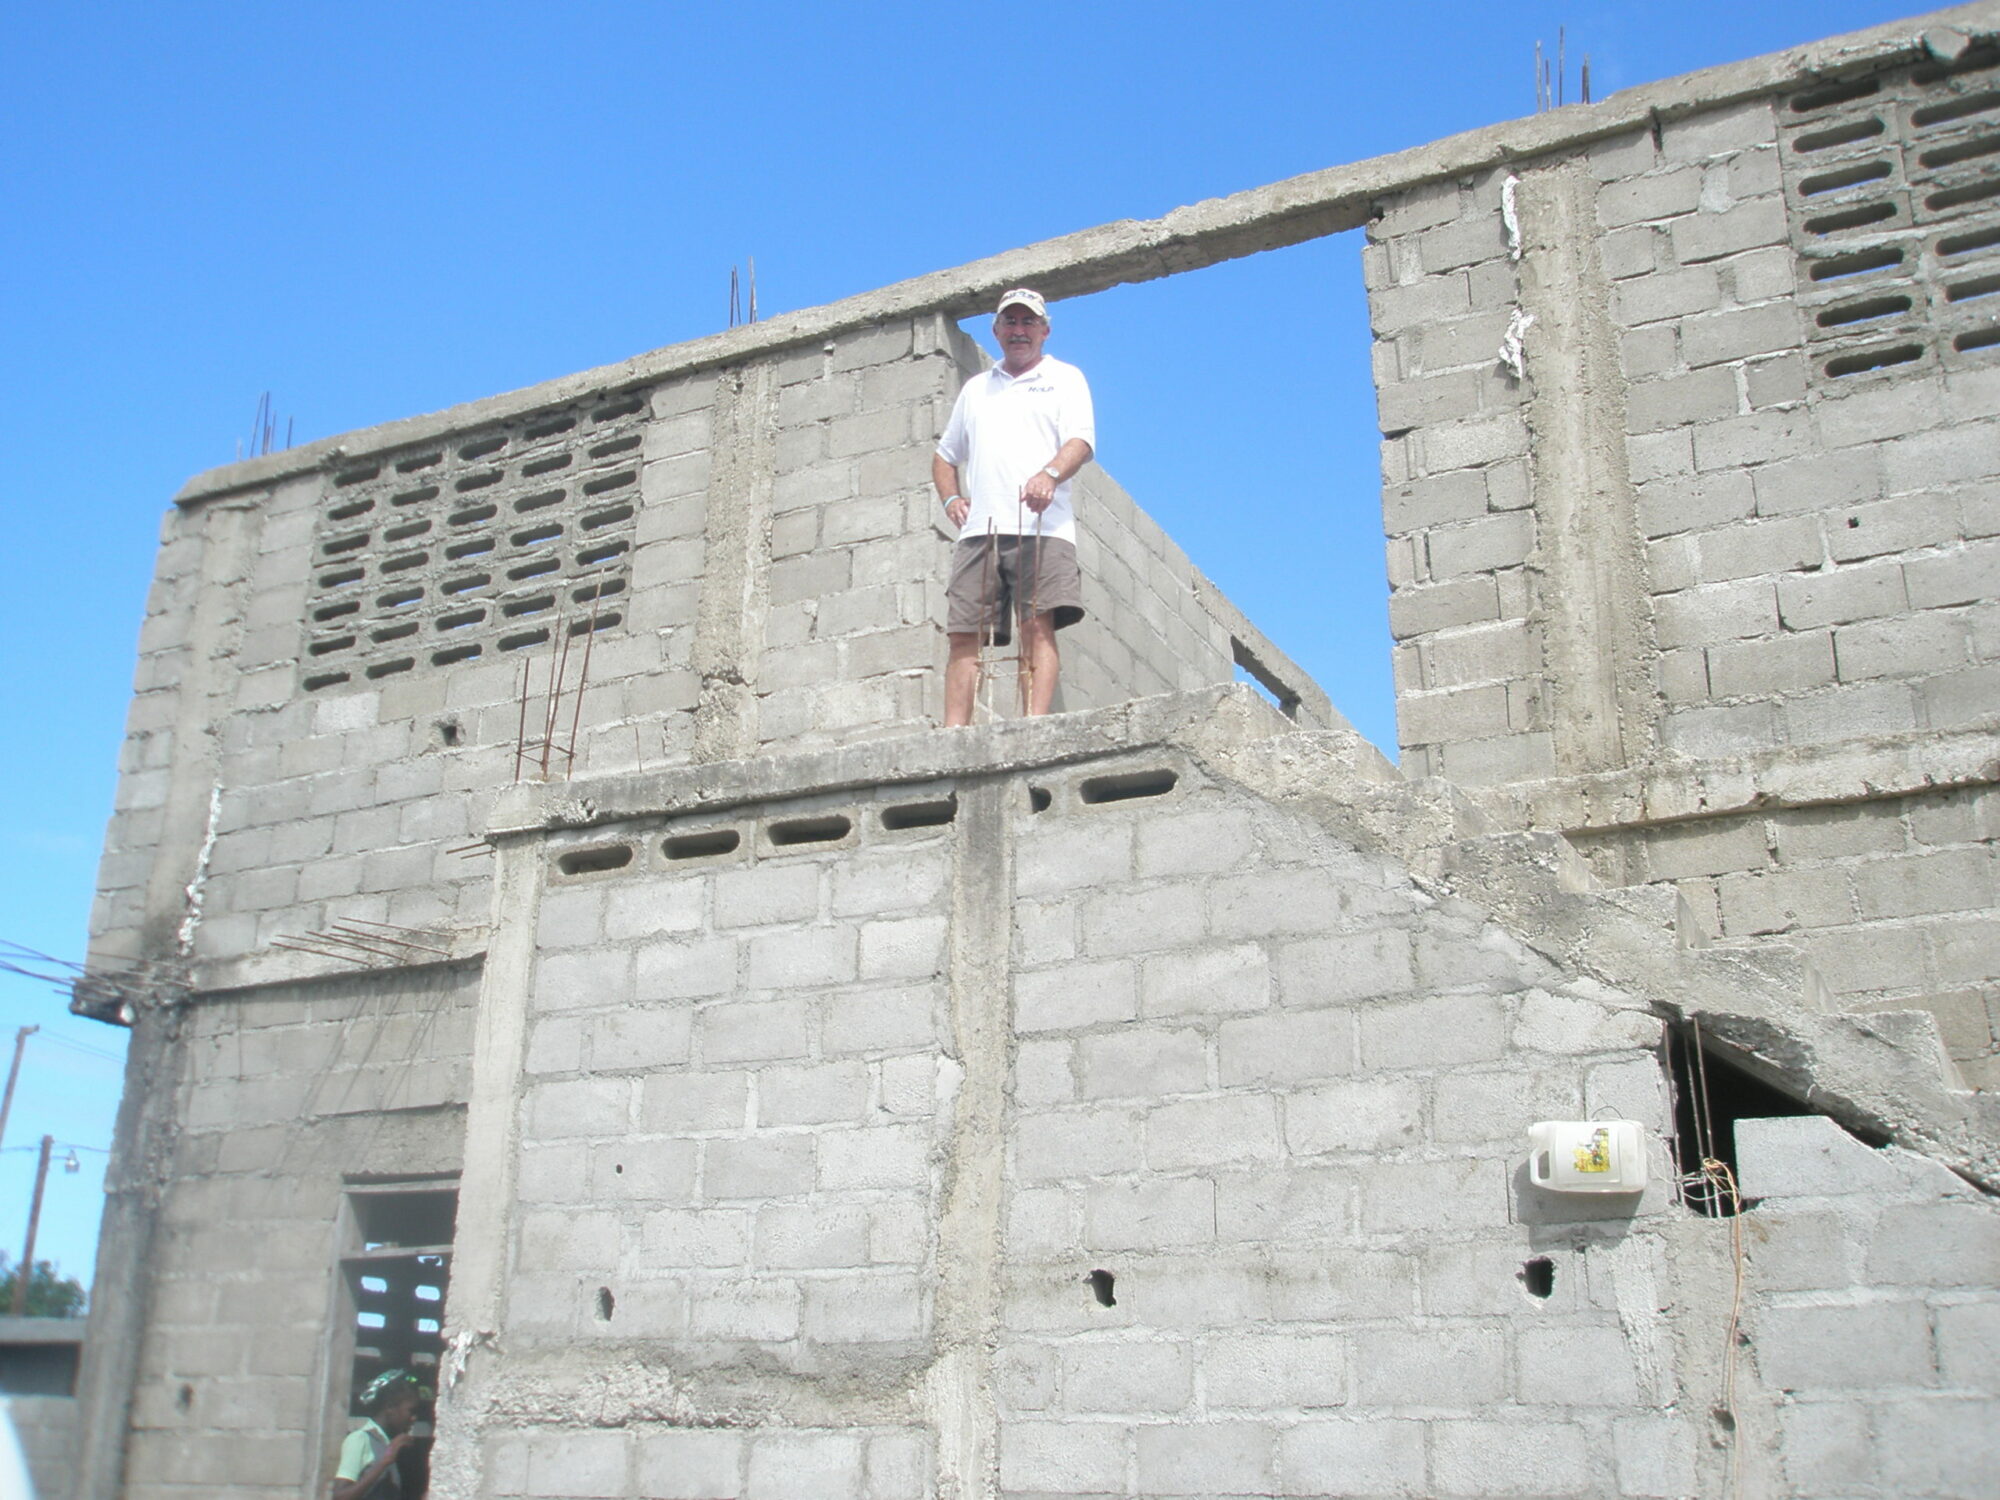 Man in front of building being constructed